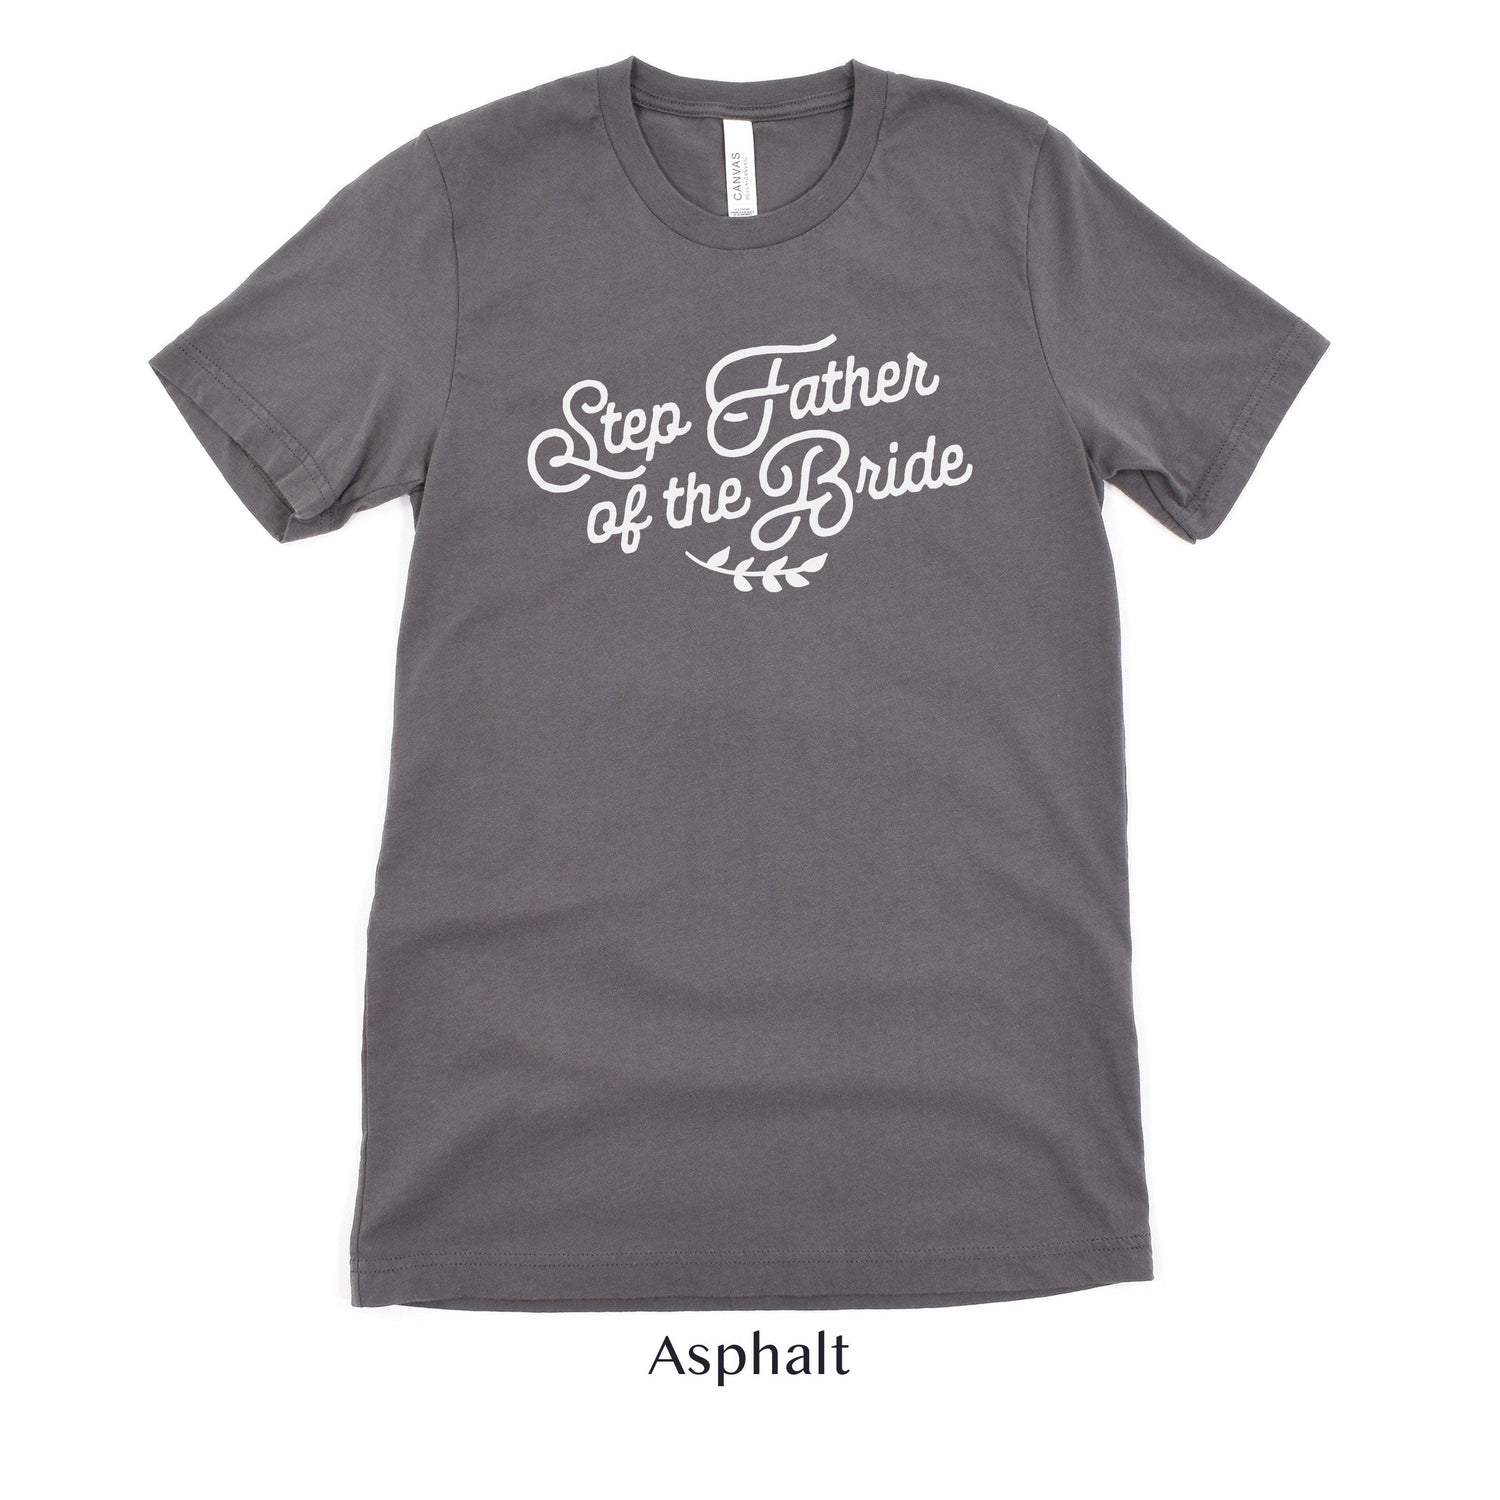 Step Father of the Bride Short-sleeve Tee by Oaklynn Lane